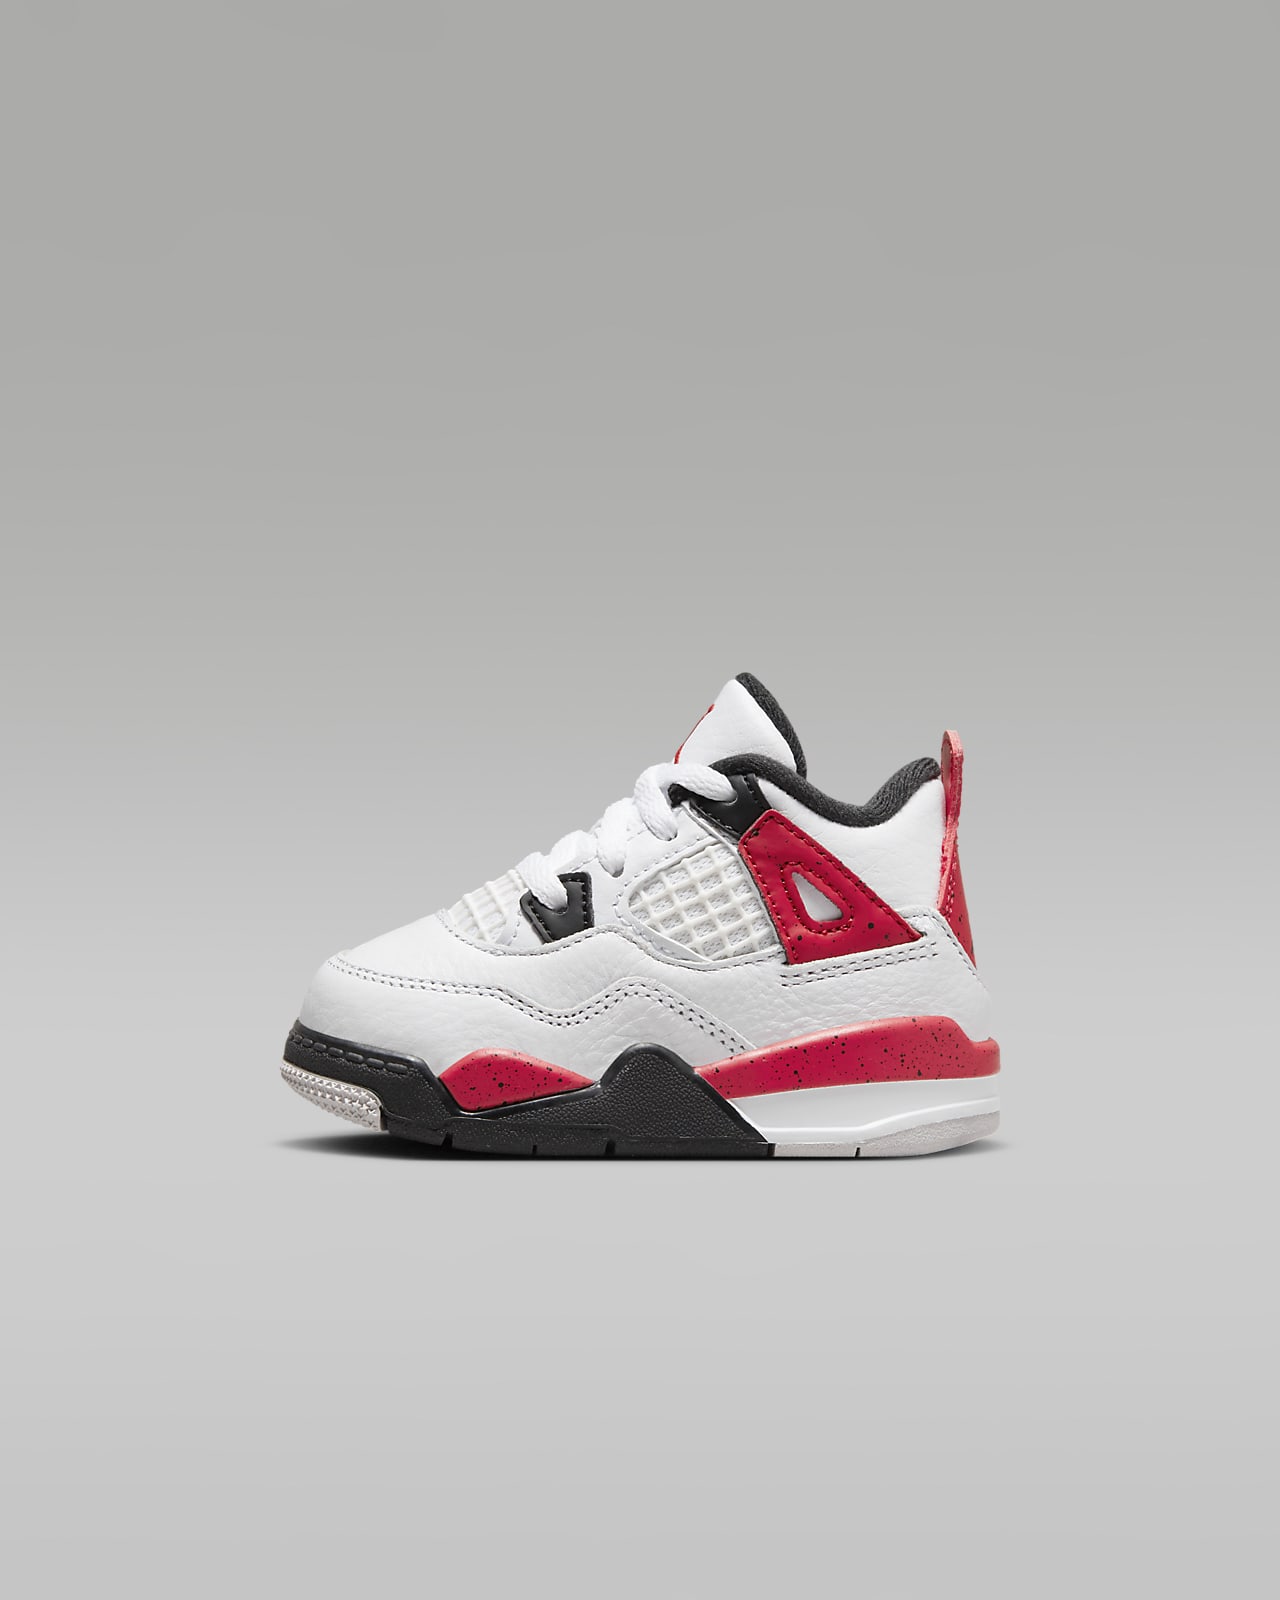 How To Style Jordan 4 RED CEMENT On Feet Outfit Ideas 2023 